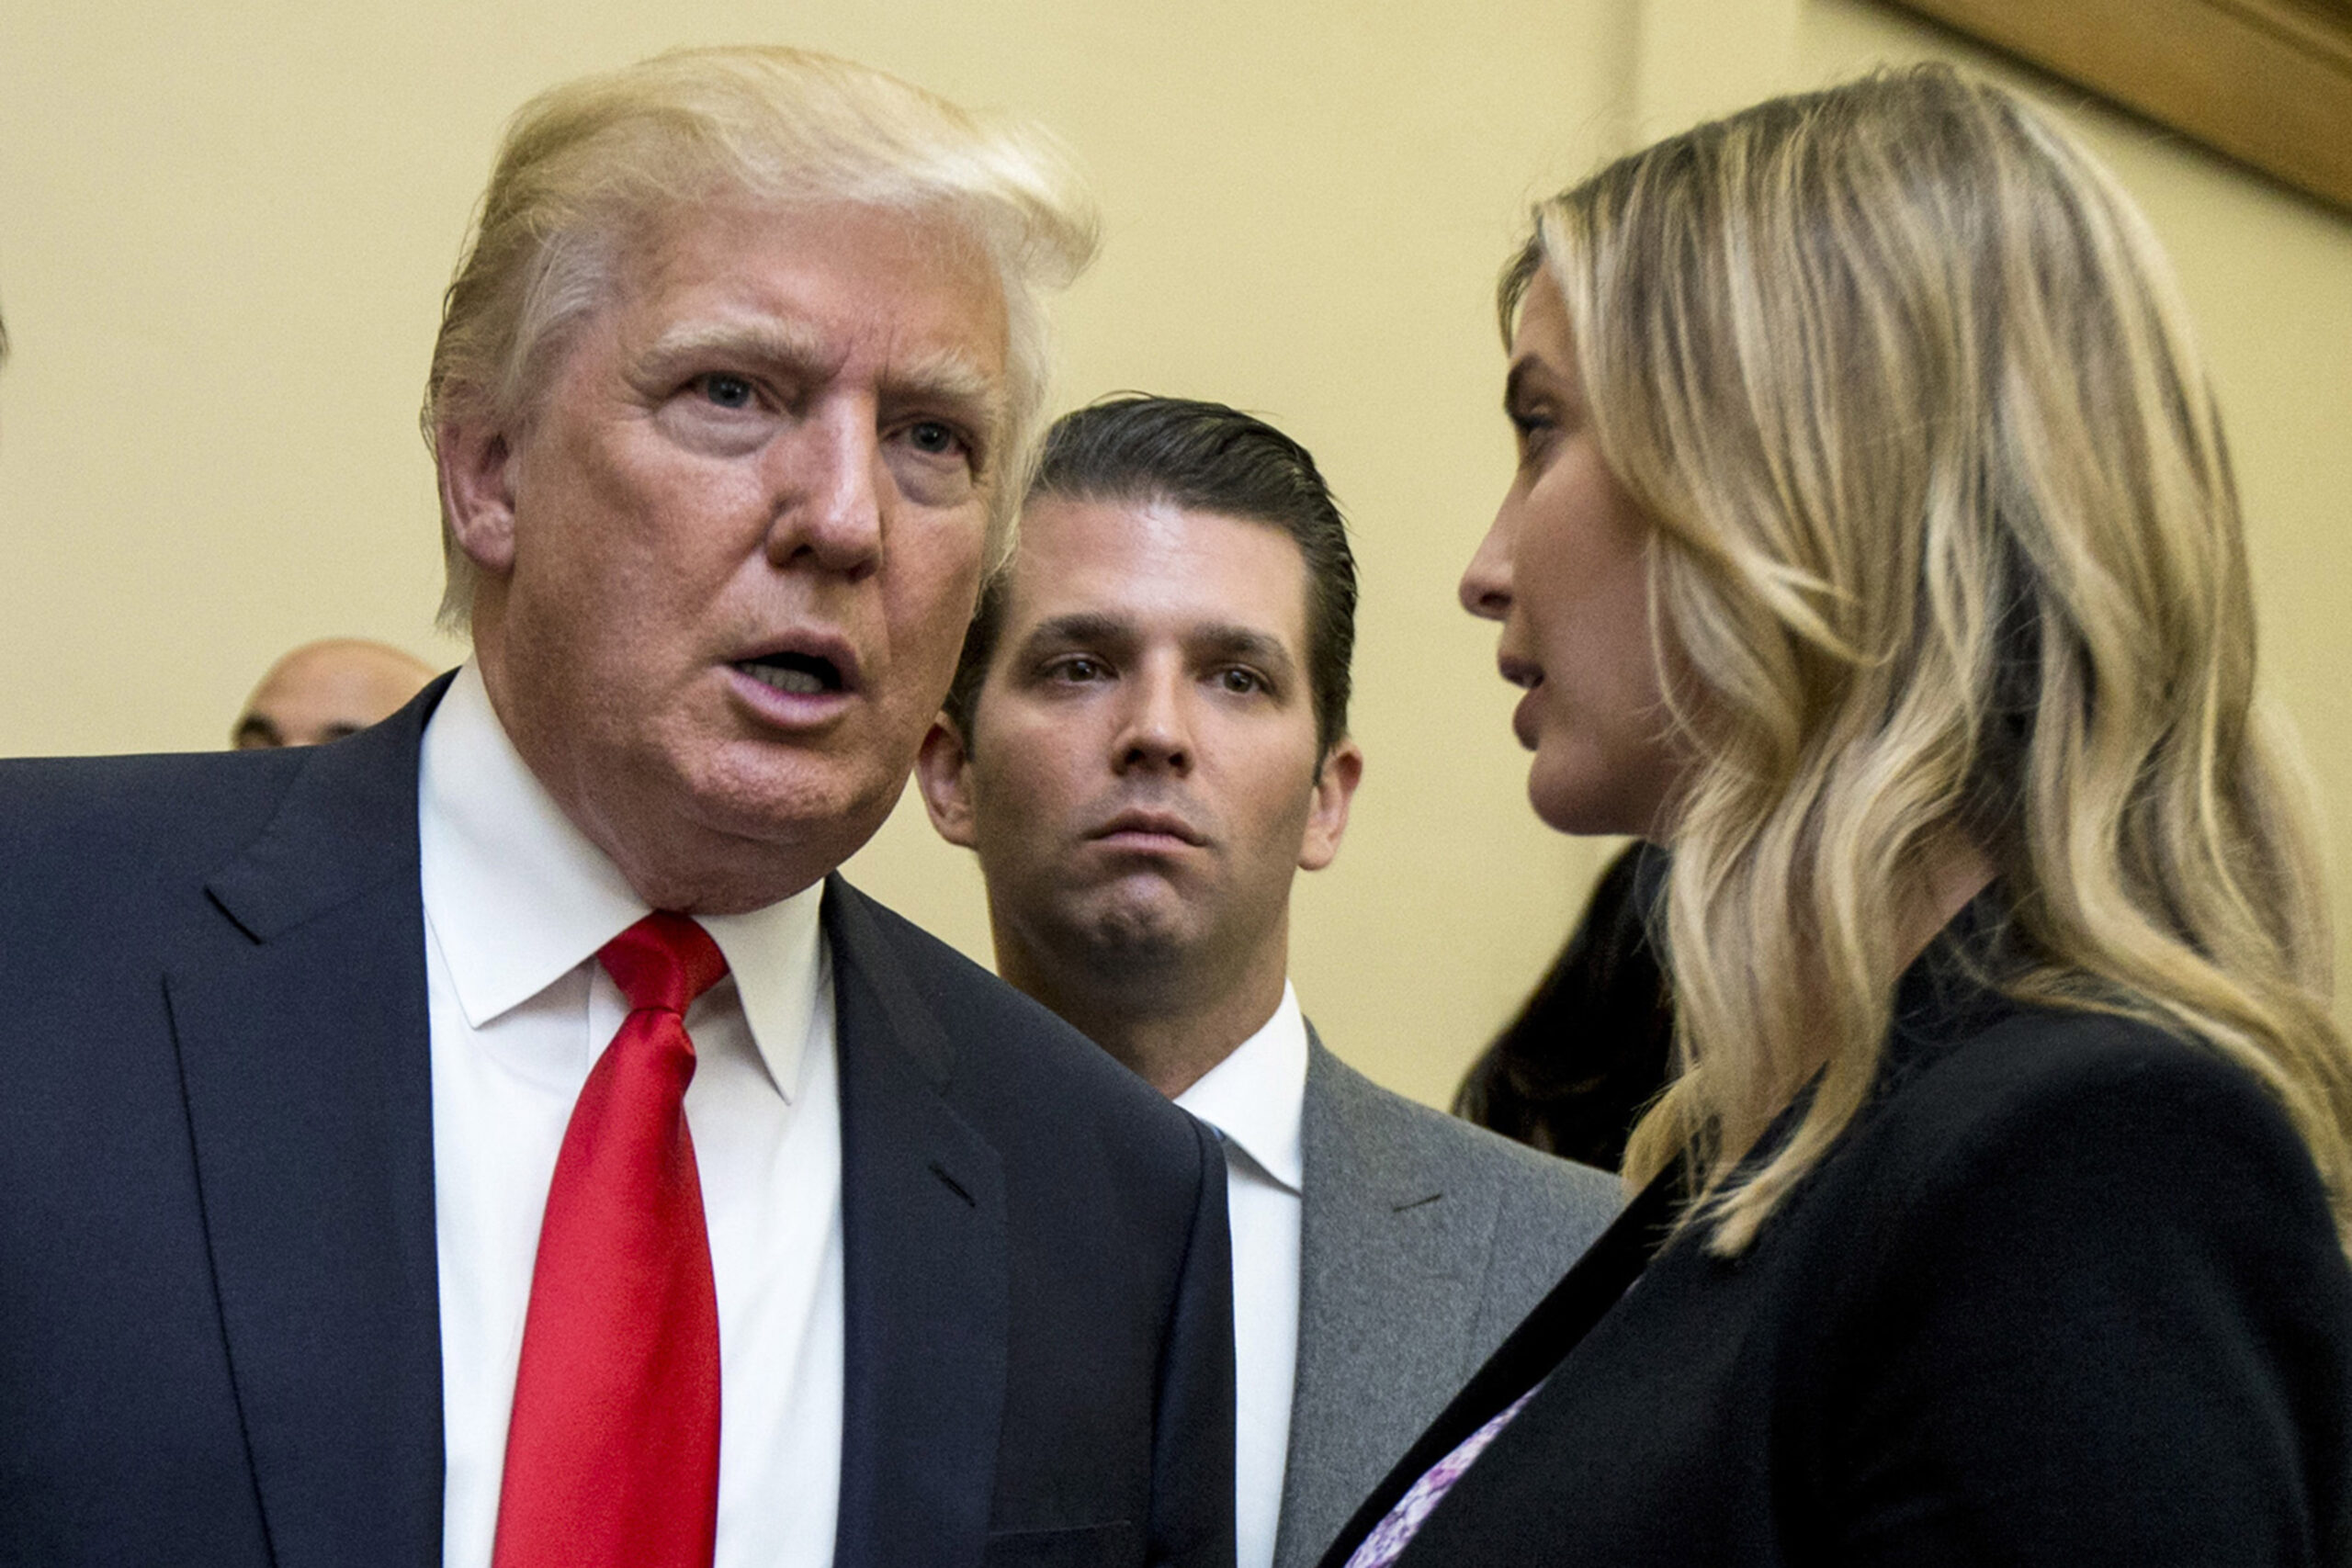 FILE - Donald Trump, left, his son Donald Trump Jr., center, and his daughter Ivanka Trump speak during the unveiling of the design for the Trump International Hotel in the The Old Post Office, in Washington, on Sept. 10, 2013. The former, his namesake son and his daughter have agreed to answer questions under oath next month in the New York attorney general's civil investigation into his business practices, unless their lawyers persuade the state's highest court to step in. A Manhattan judge signed off Wednesday, June 8, 2022, on an agreement that calls for the Trumps to give depositions — a legal term for sworn, pretrial testimony out of court — starting July 15. (AP Photo/Manuel Balce Ceneta, File)